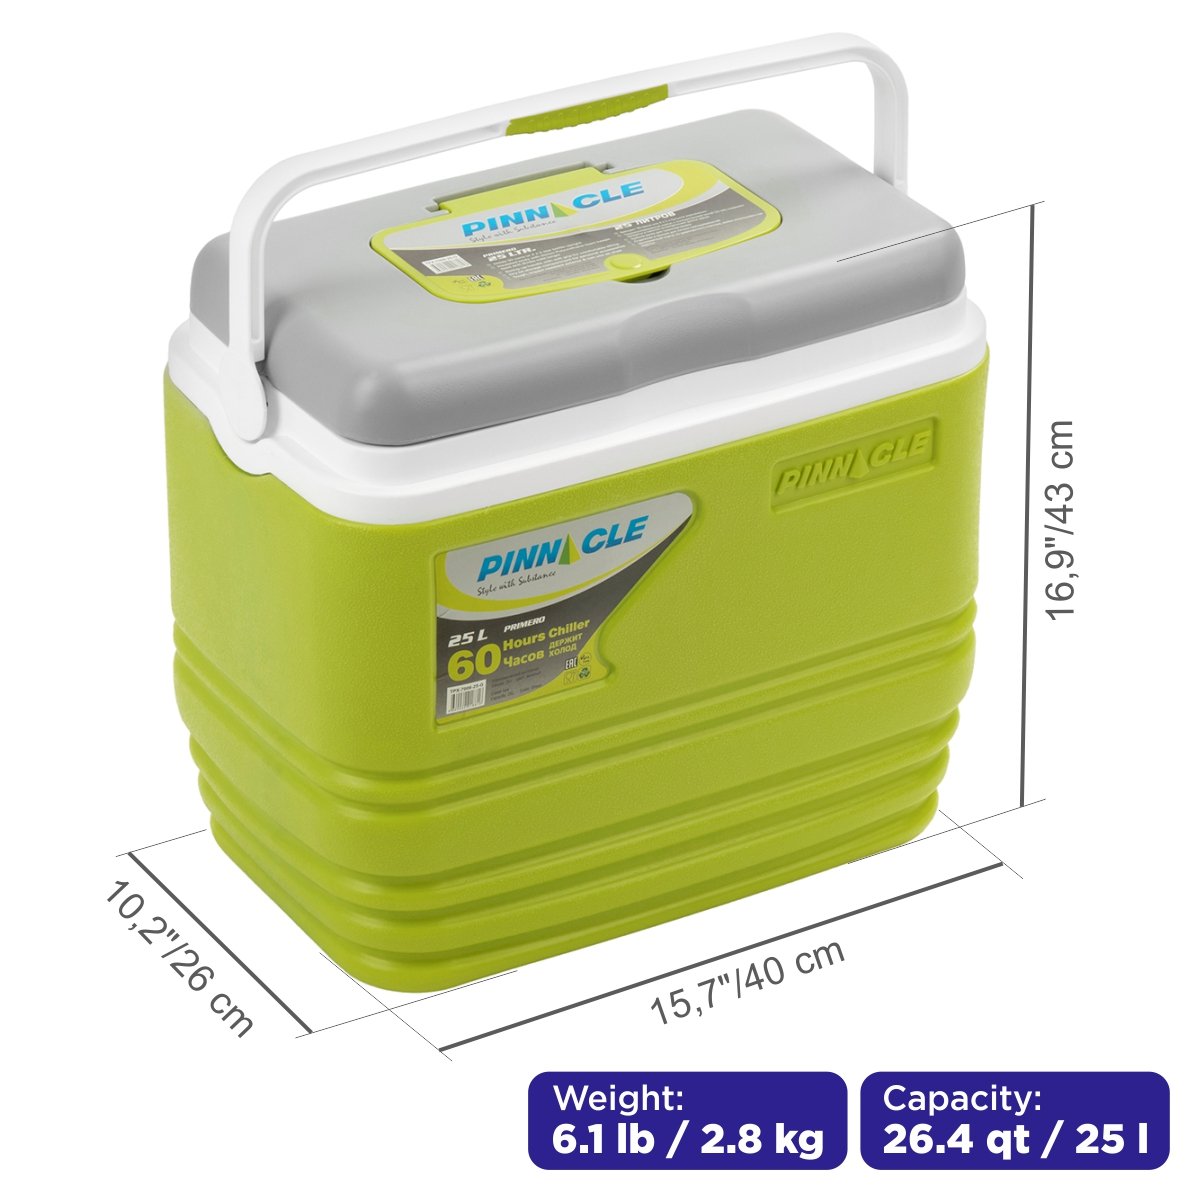 Primero Portable Camping Ice Chest with Lid Cup Holders, 26 qt is 15,7 inches long, 15.7 inches high, 10.2 inches wide, weighing only 6 lbs